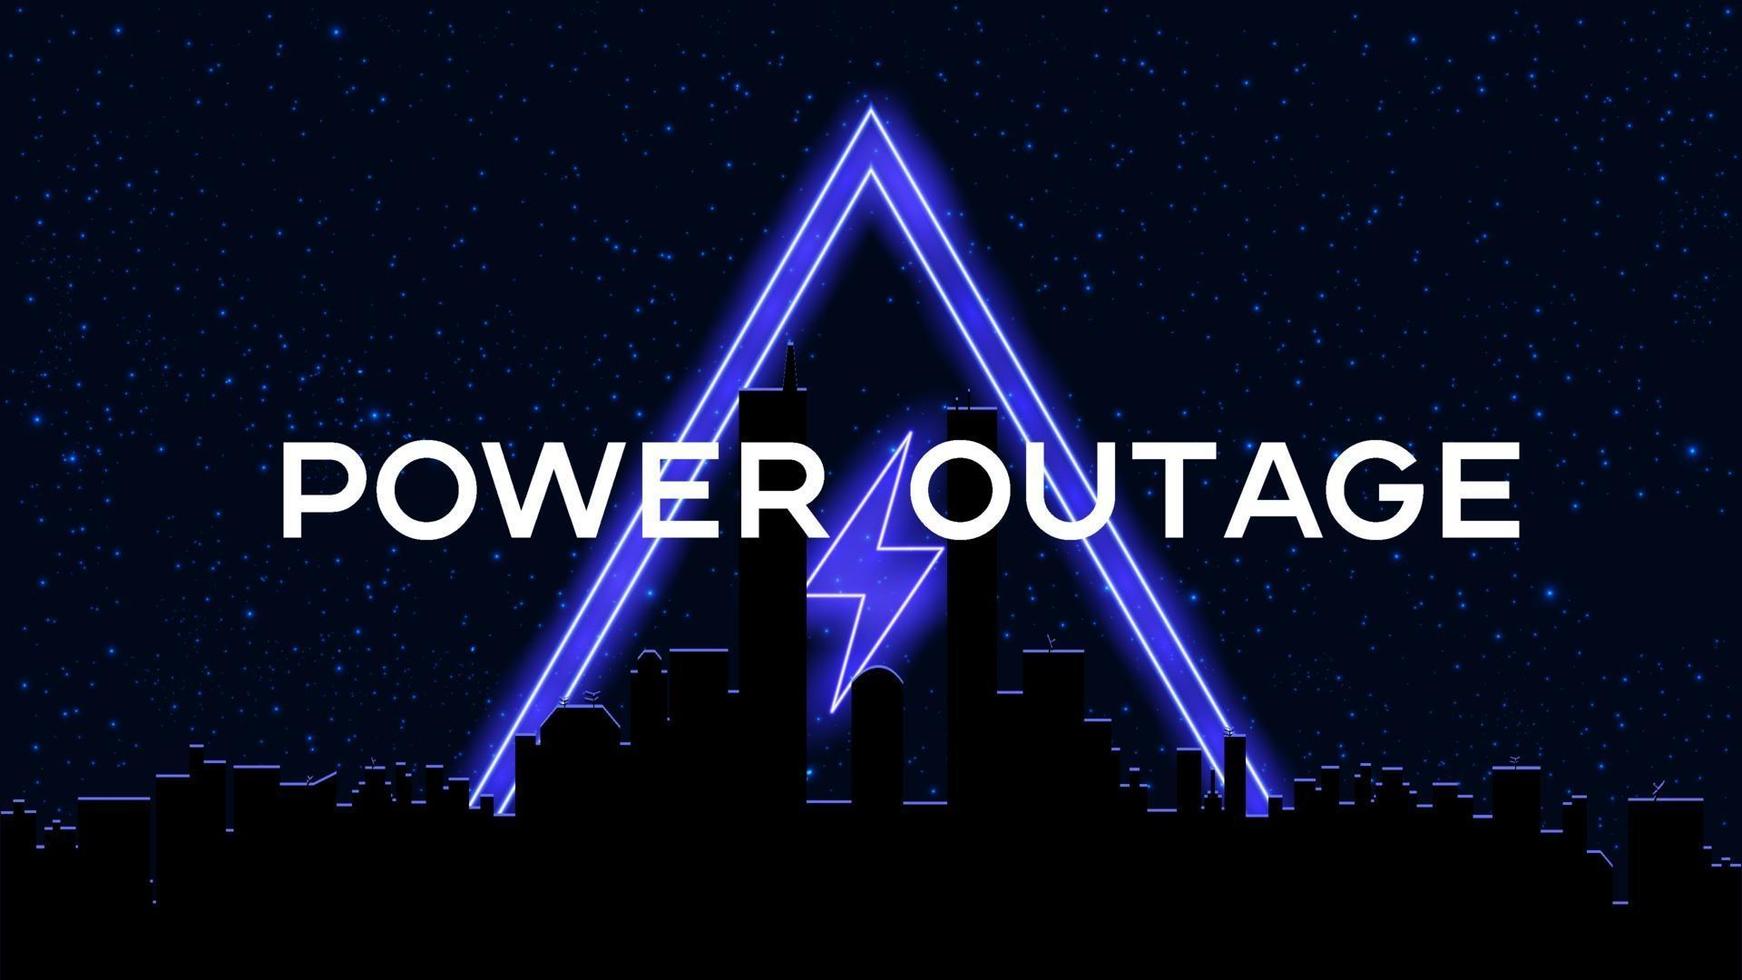 Power outage banner  with a warning neon sign. Vector illustration.